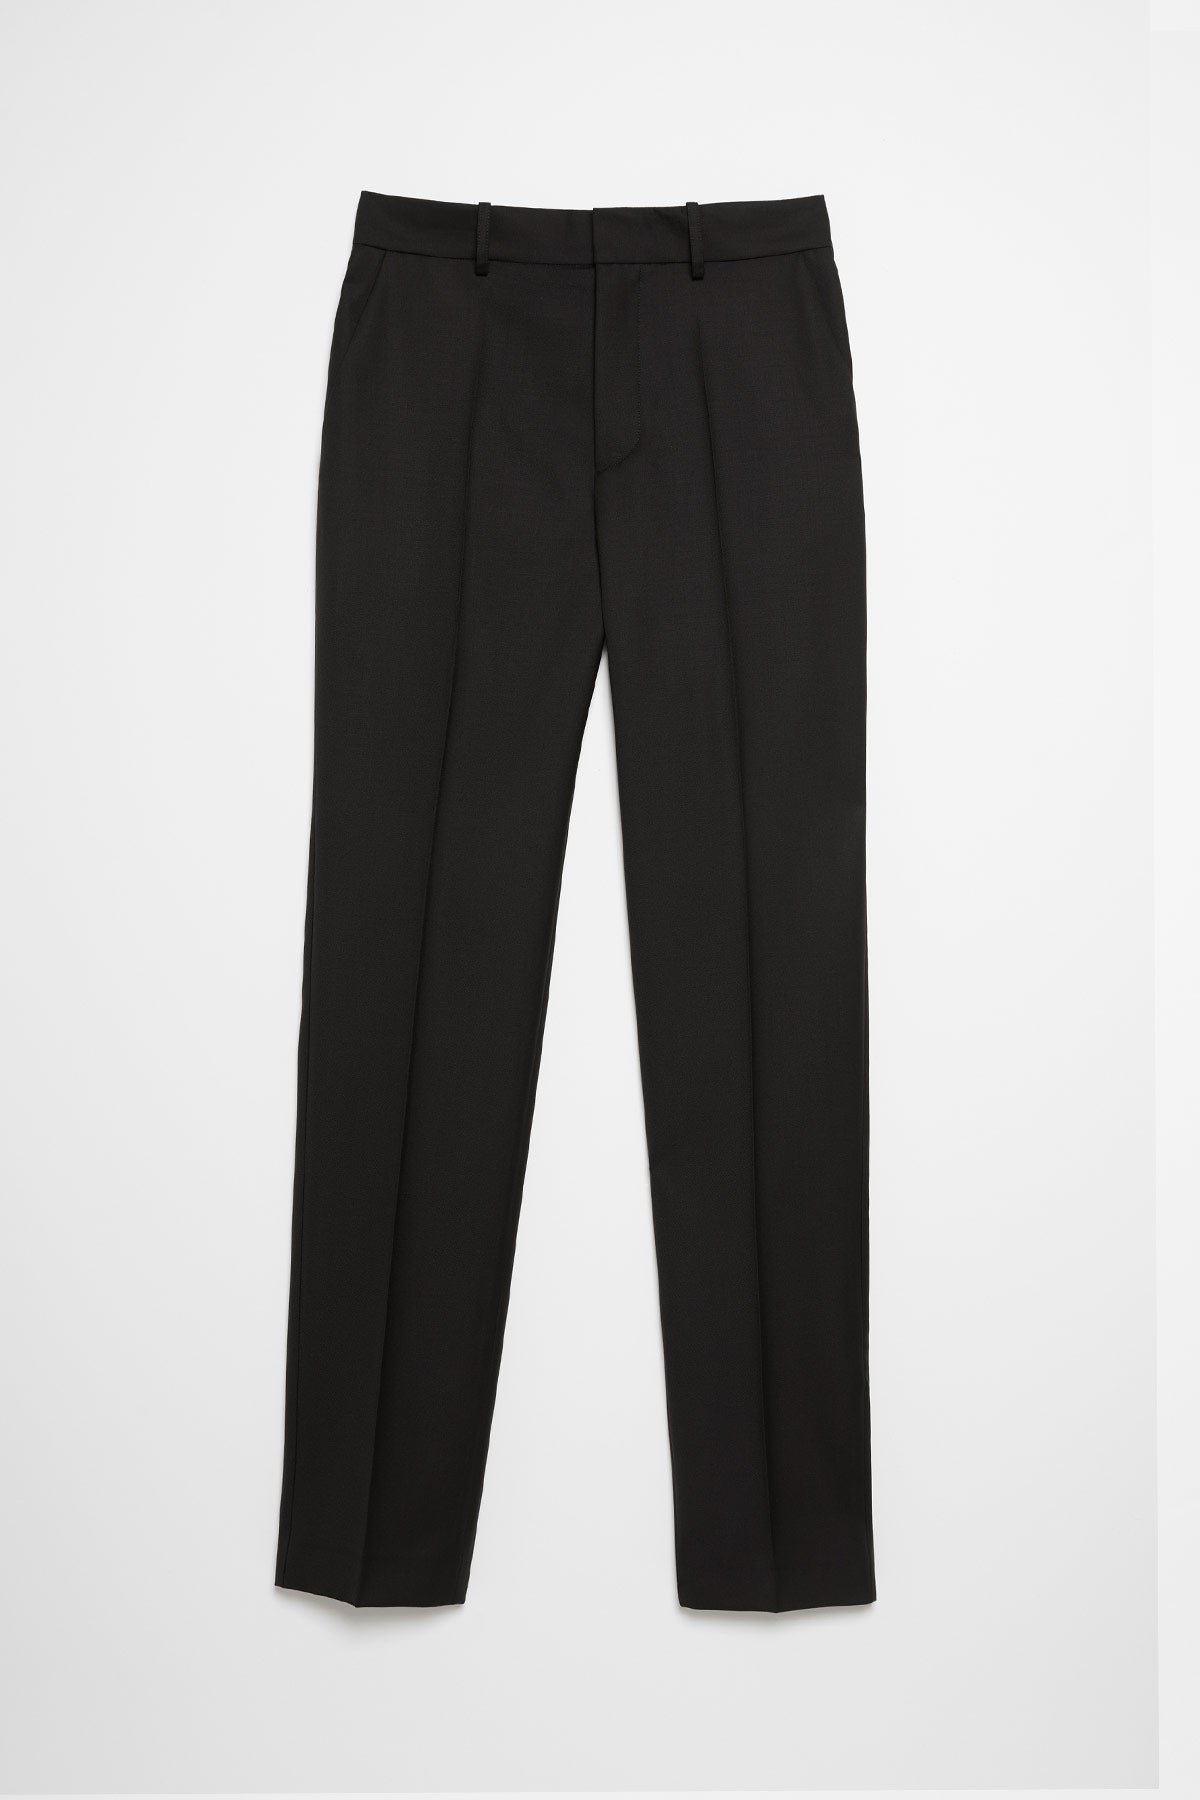 CQFD Classic black suit pants with a slightly wide tapered cut, made of 100% natural Italian virgin wool, respectful of the environment and animals, from US size 4 to 26 and more on request, chic and timeless garment made in France in Paris